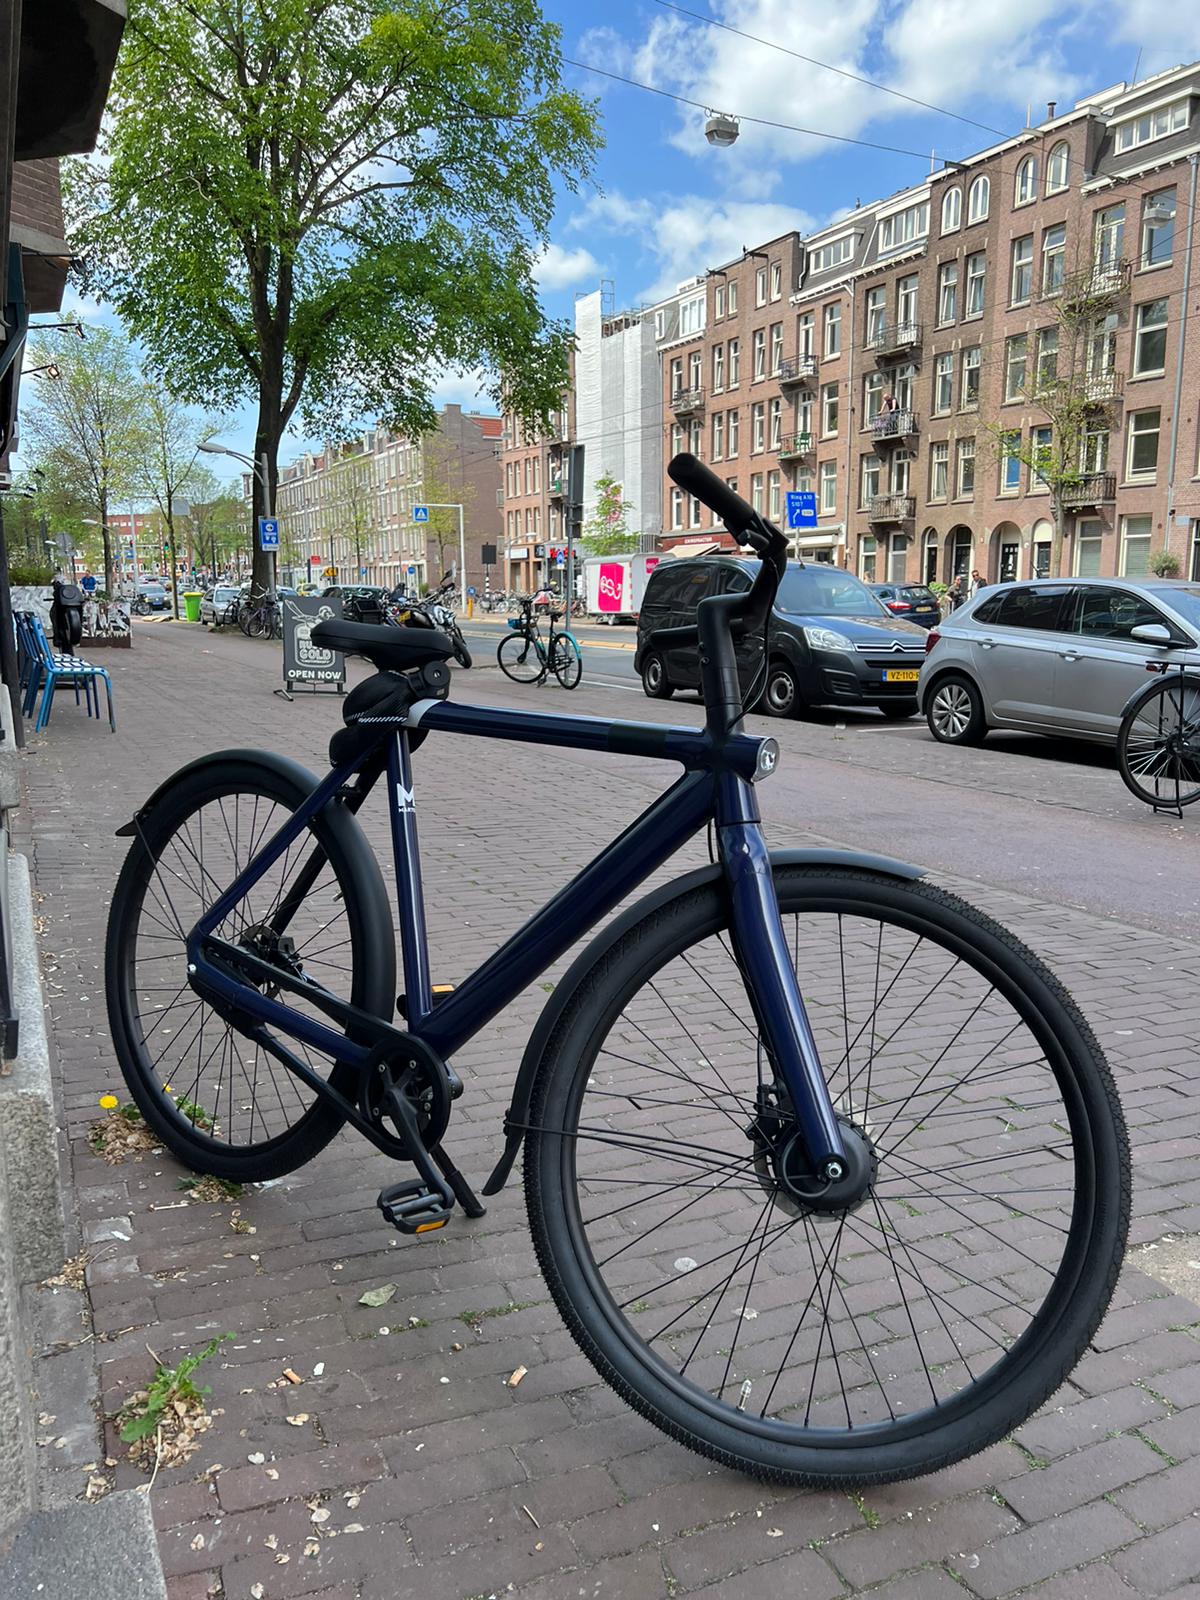 NAVY BLUE PROTECT KIT FOR VANMOOF S2/S3